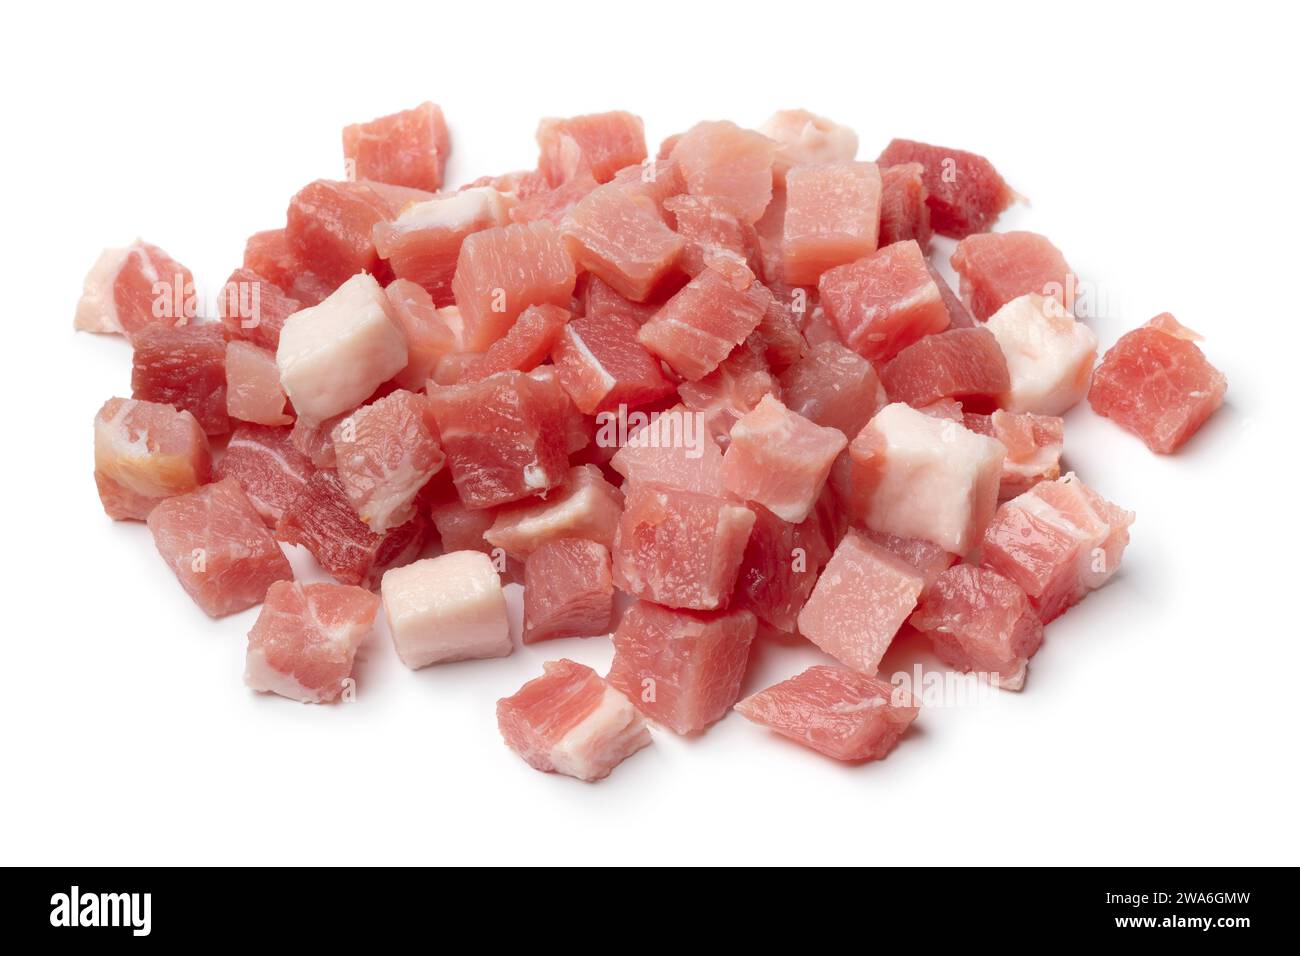 Heap of smoked bacon cubes isolated on white background close up Stock Photo